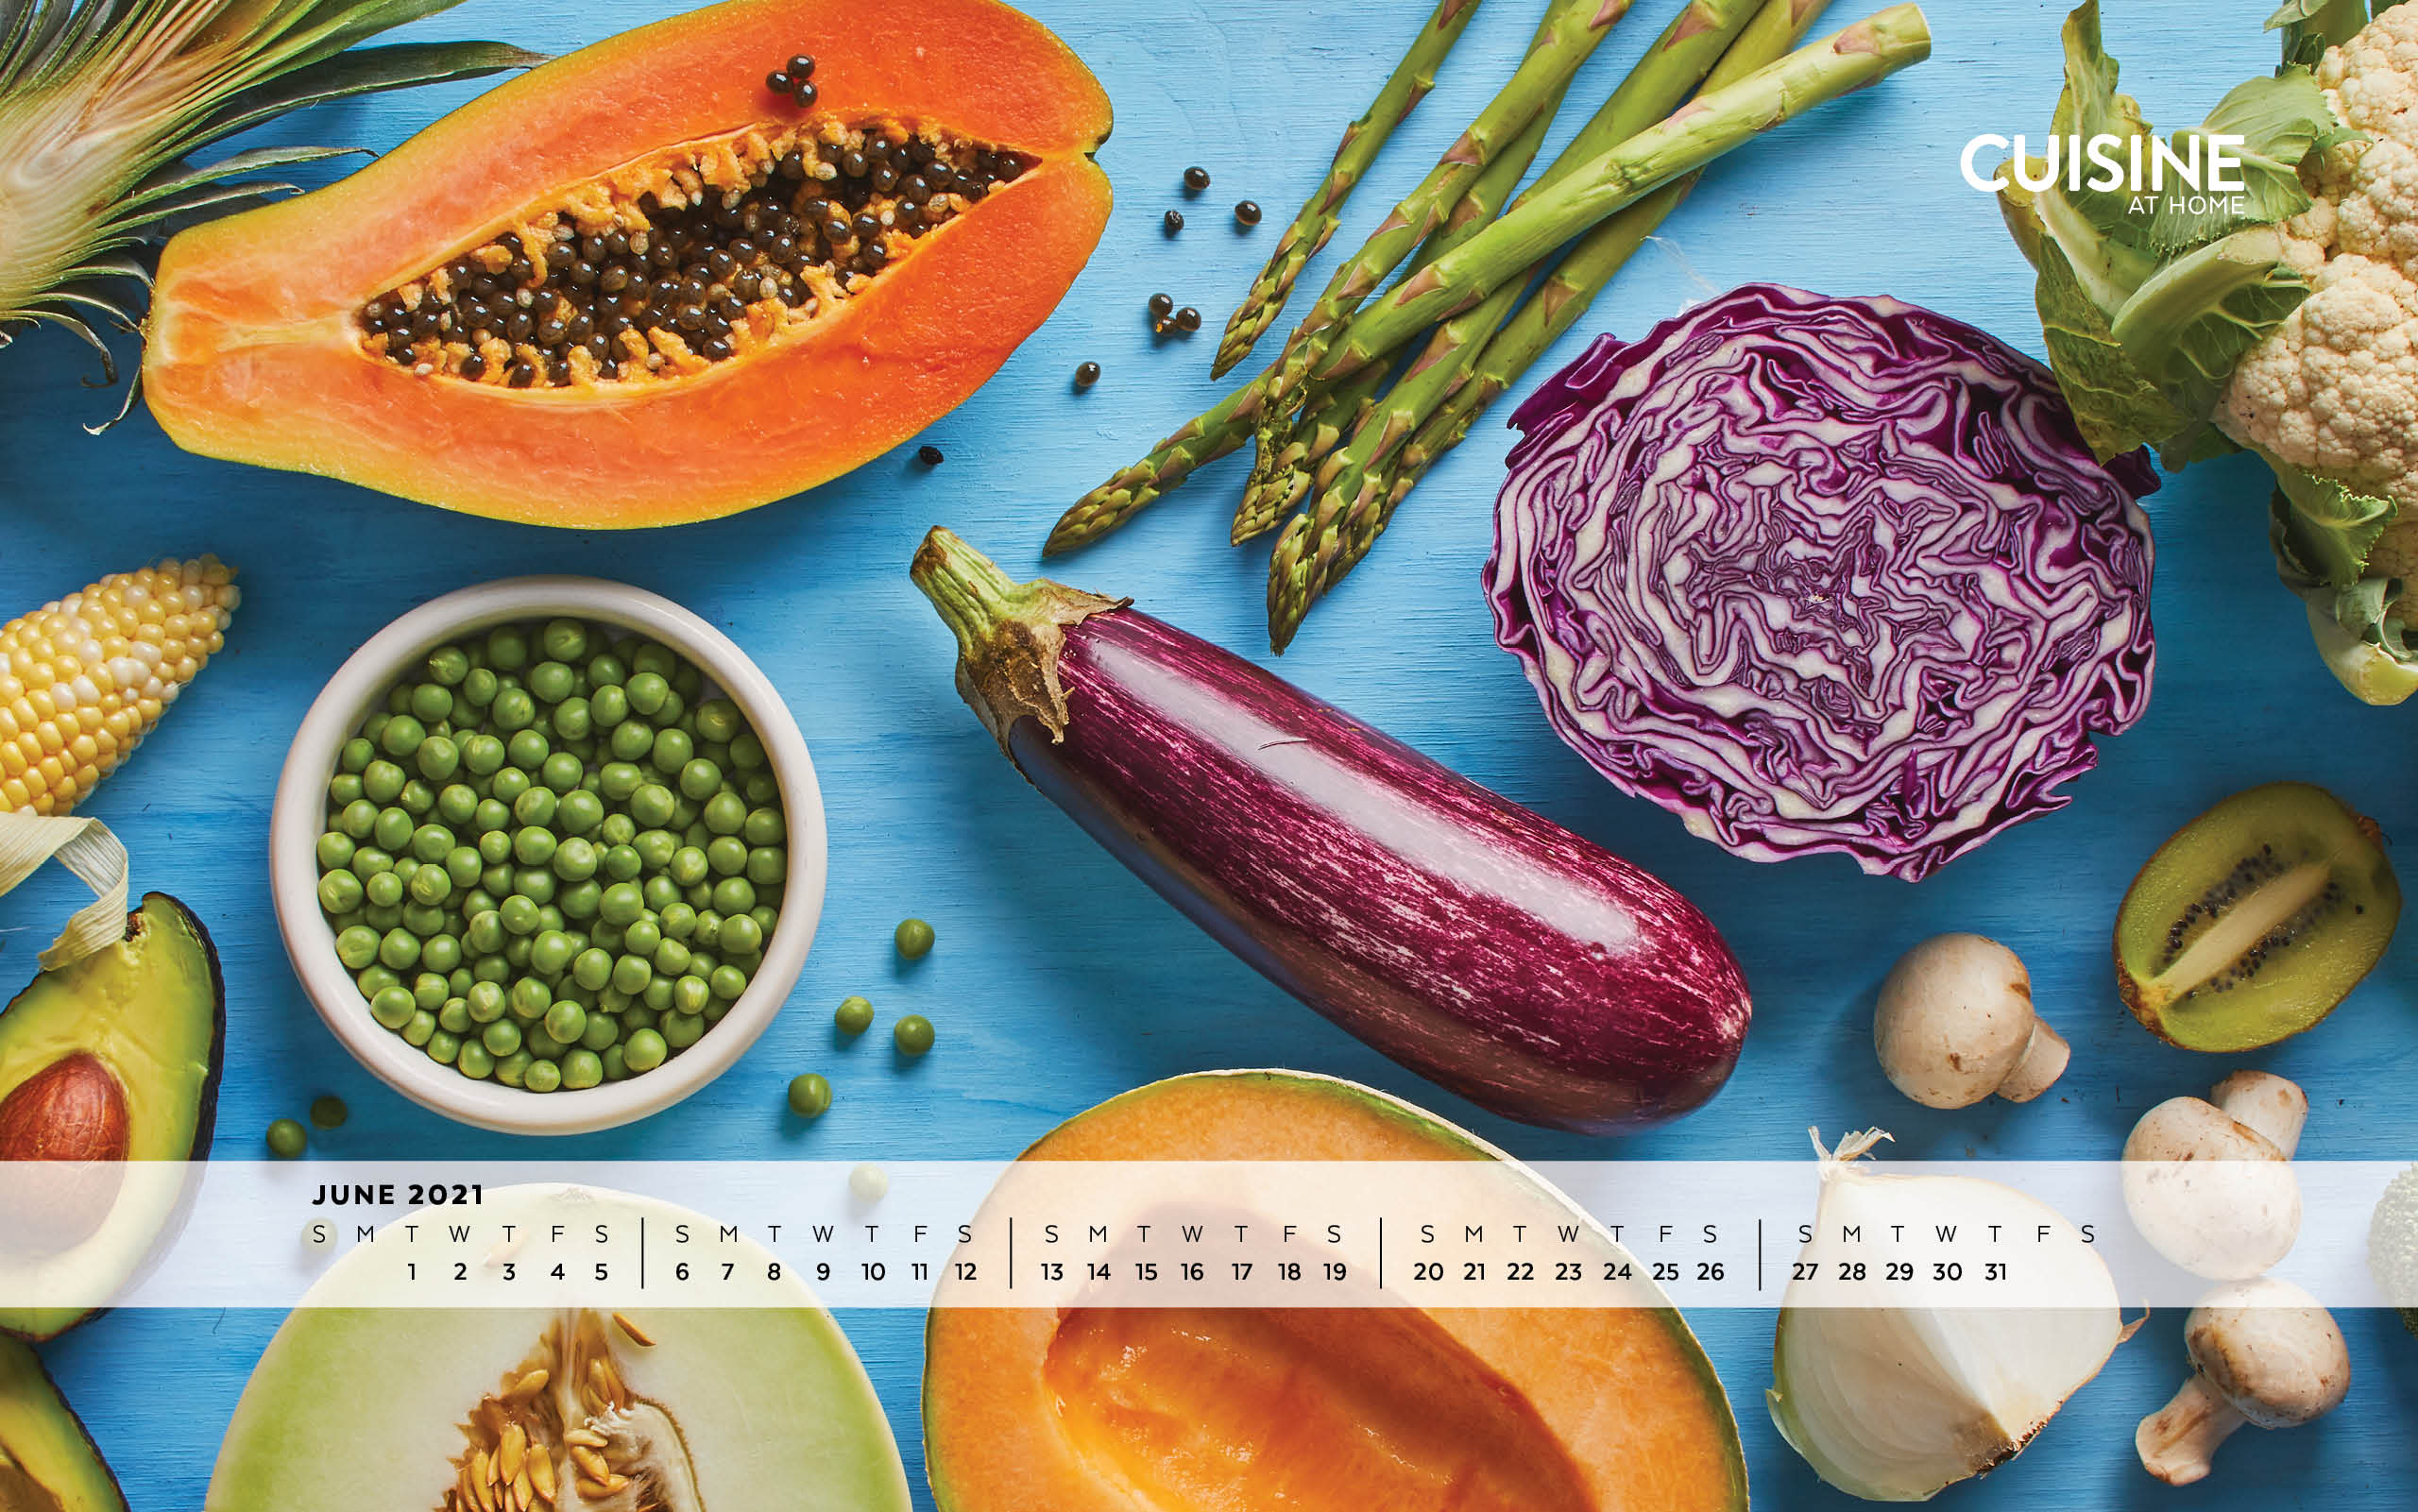 Free Desktop Wallpaper with calendar - June 2021 - Cuisine at Home - Summer aesthetic food fruits and vegetables colorful cooking eggplant papaya